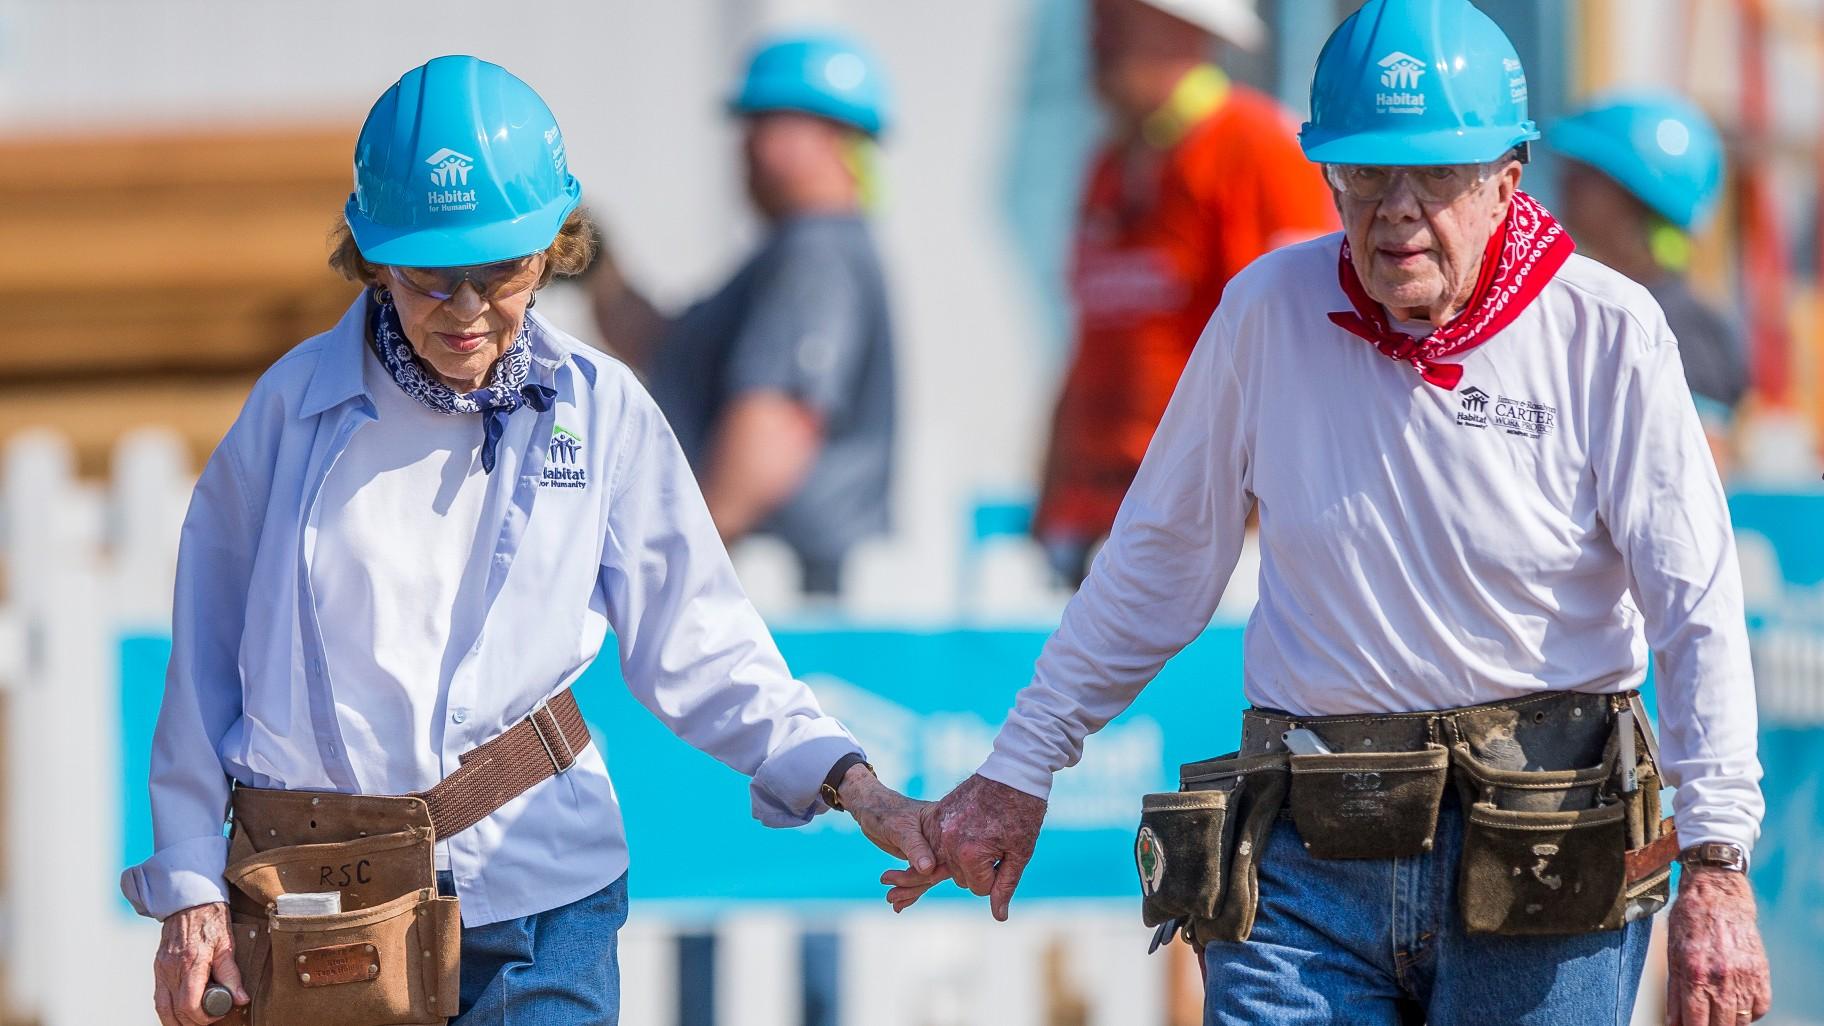 Former President Jimmy Carter, right, holds hands with his wife, former first lady Rosalynn Carter, as they work with other volunteers on site, Aug. 27, 2018, in Mishawaka, Ind.(Robert Franklin / South Bend Tribune via AP, File)